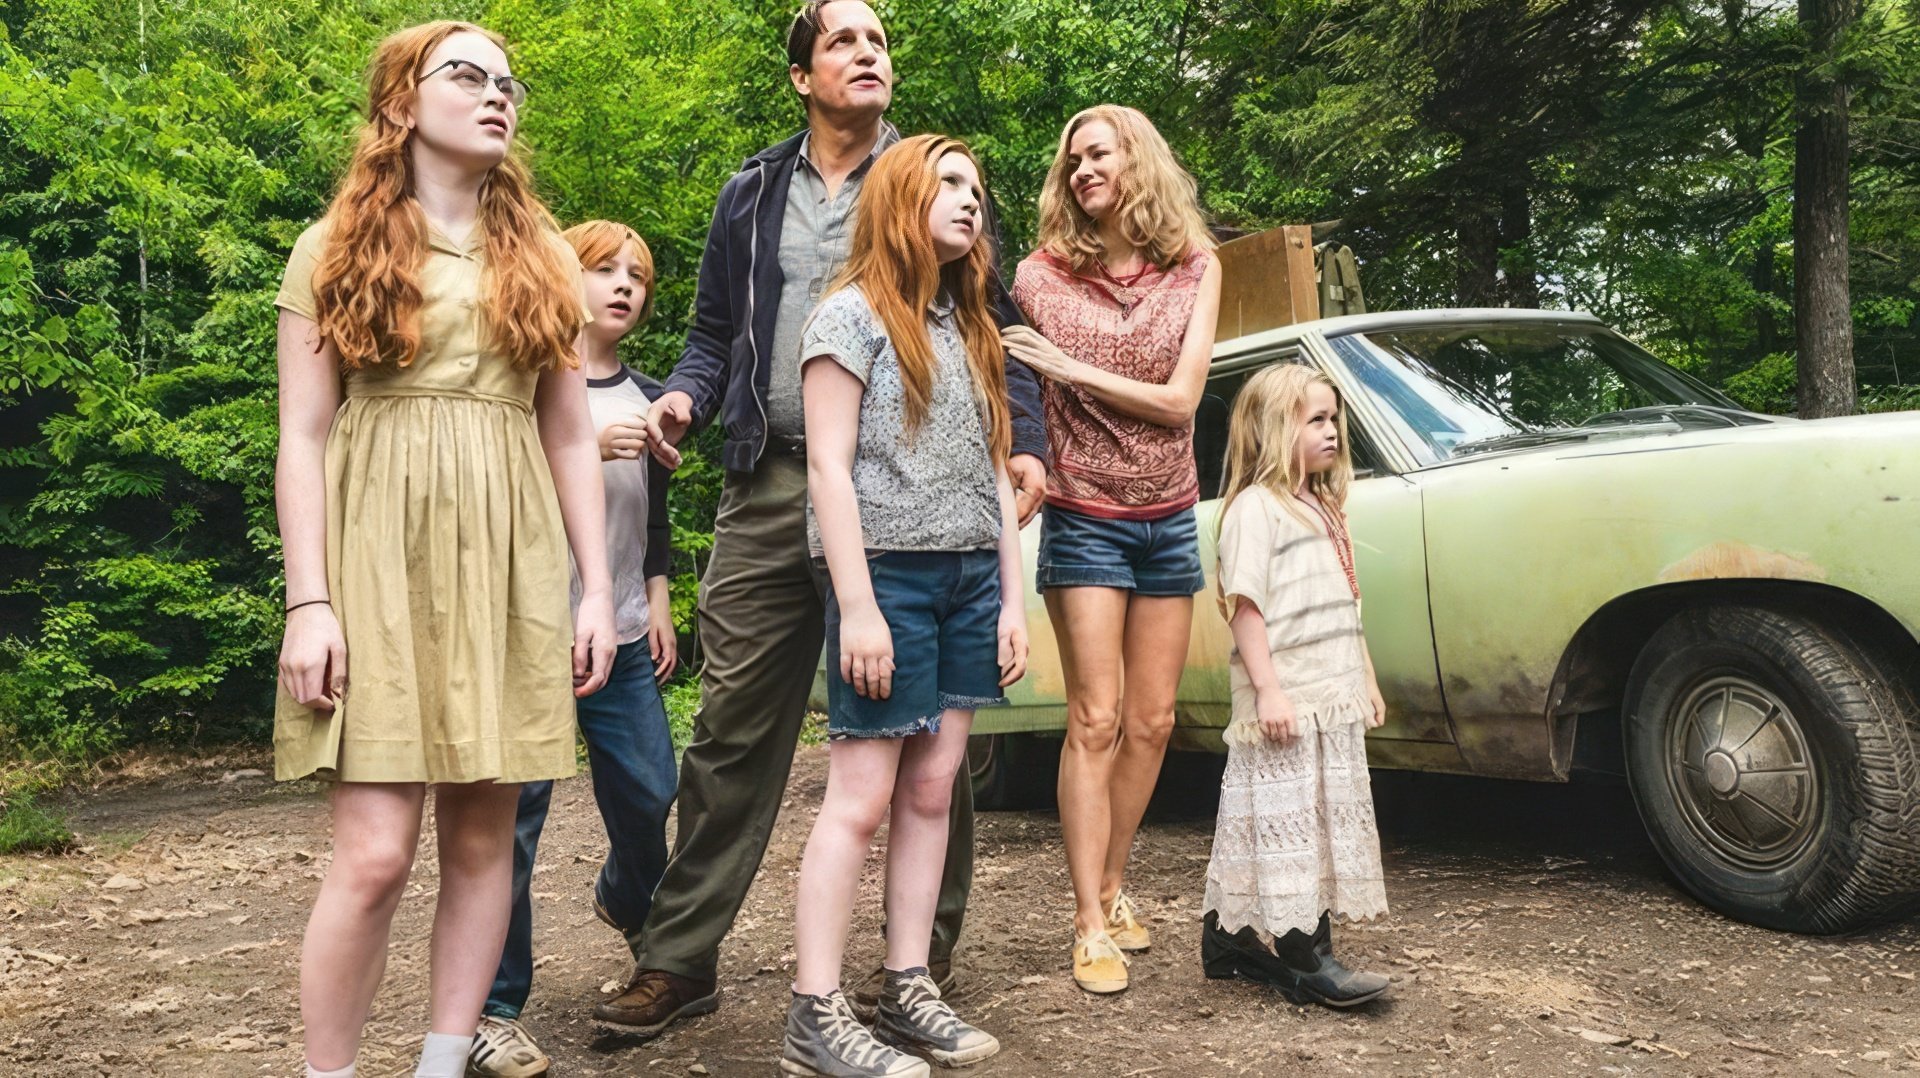 A Frame from the Film The Glass Castle